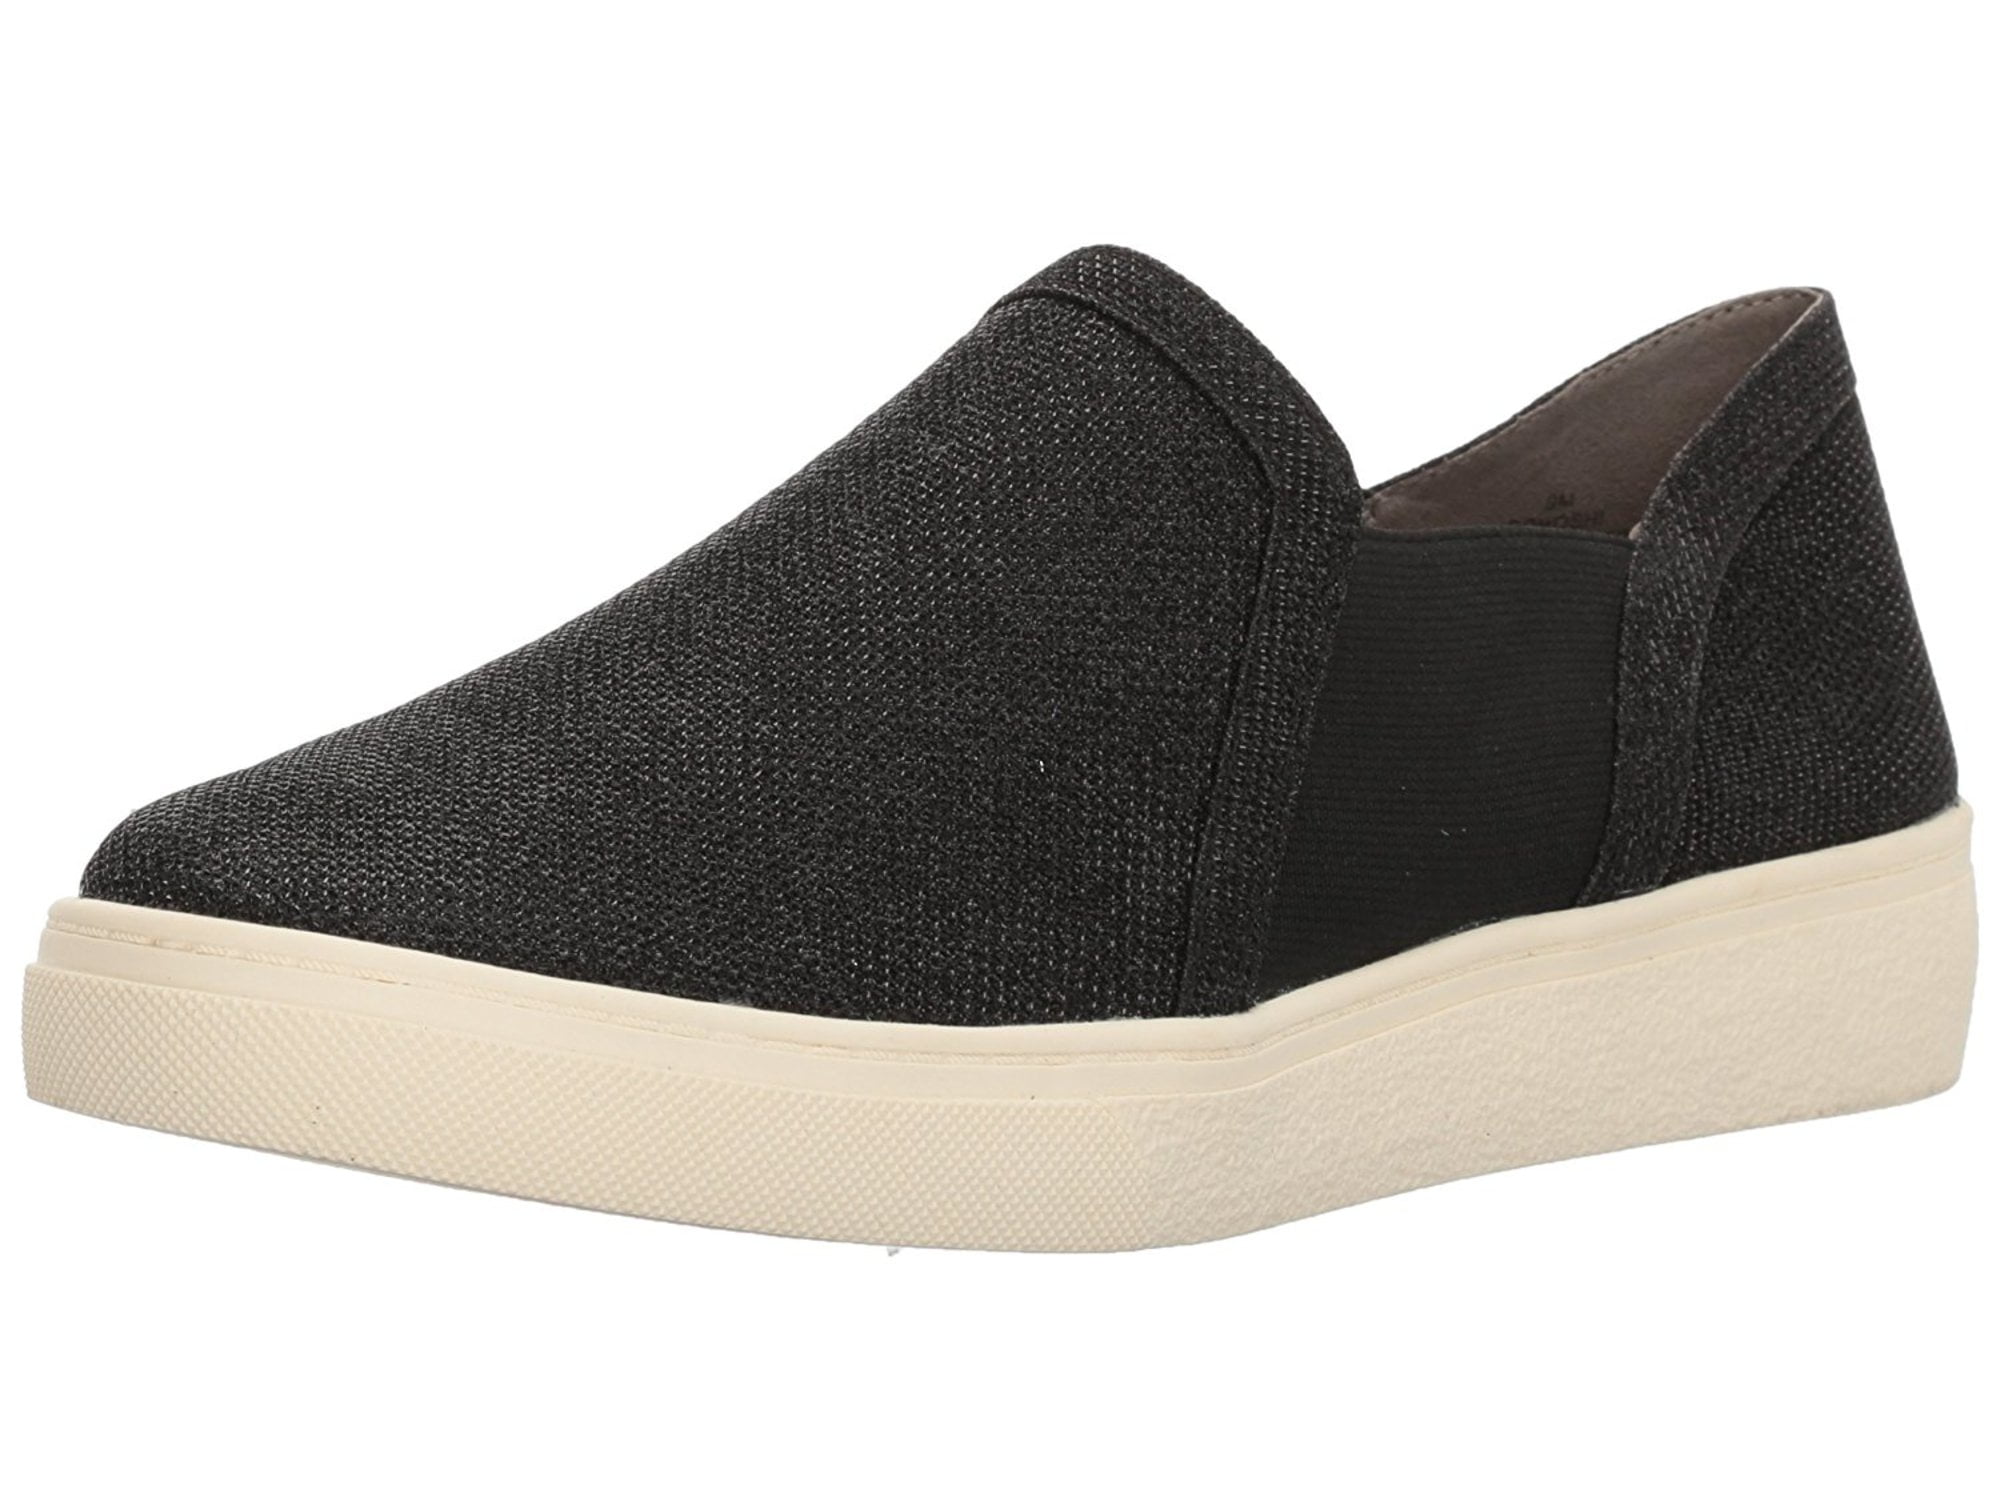 slip on sneakers womens canada